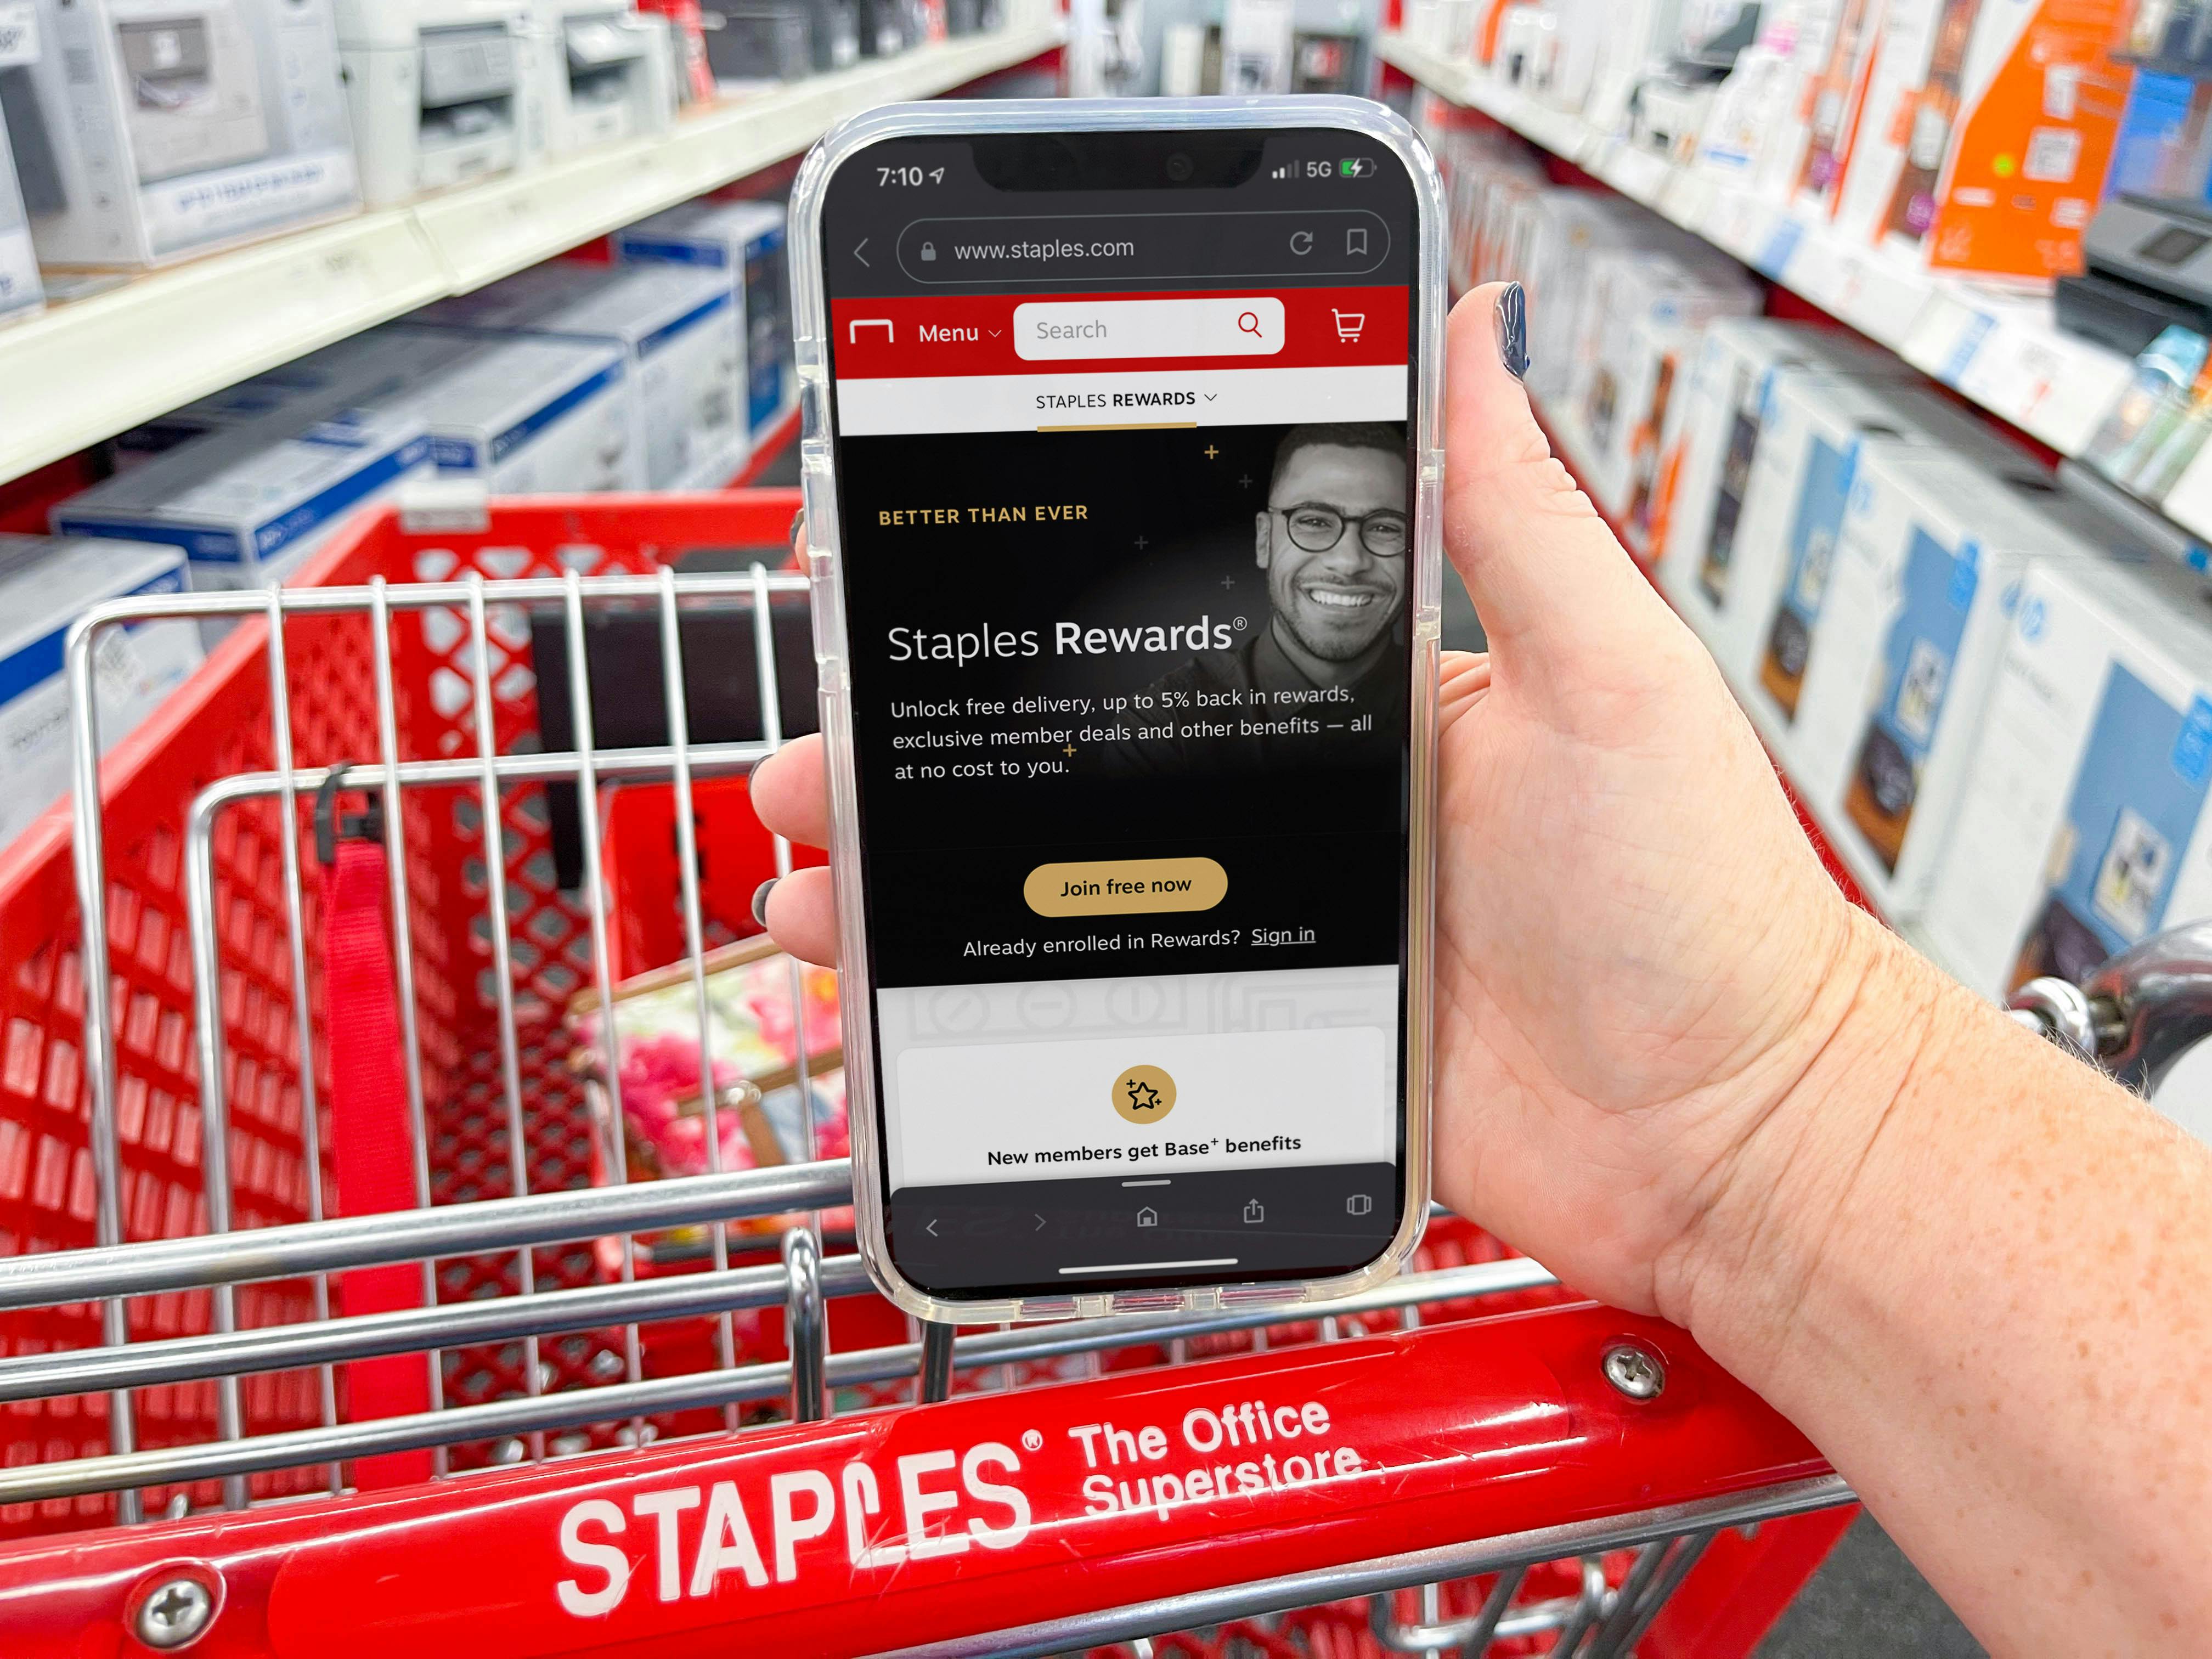 A person's hand resting on the handle of a Staples shopping cart, holding a cell phone displaying the Staples Rewards page on their website.